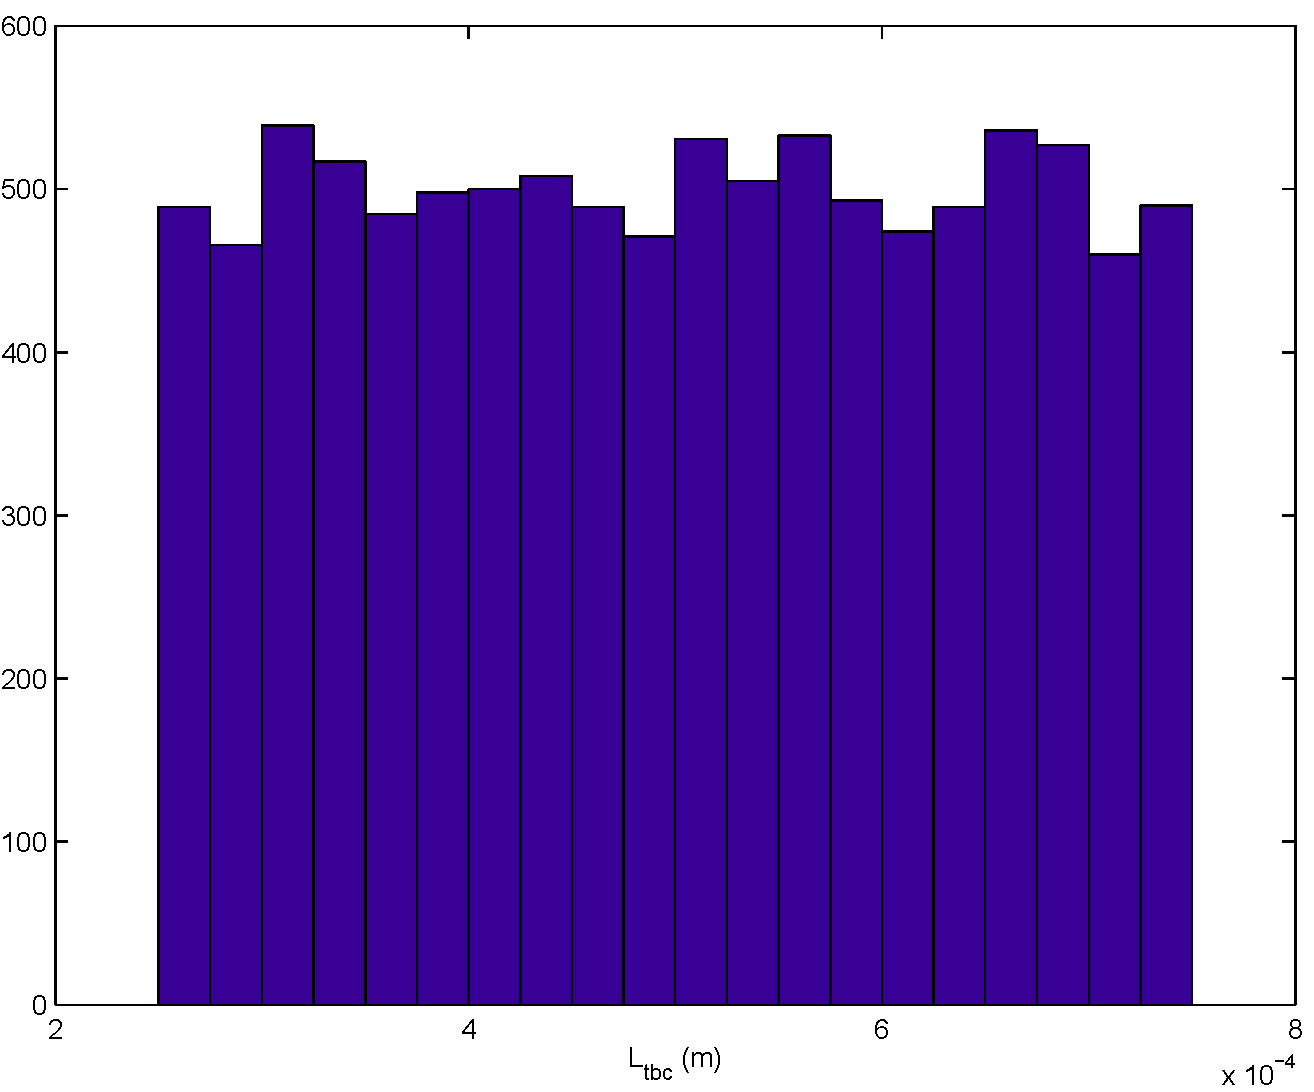 The figure is a histogram of a random sample from a uniformly-distributed LTBC for a sample size of N=10000.